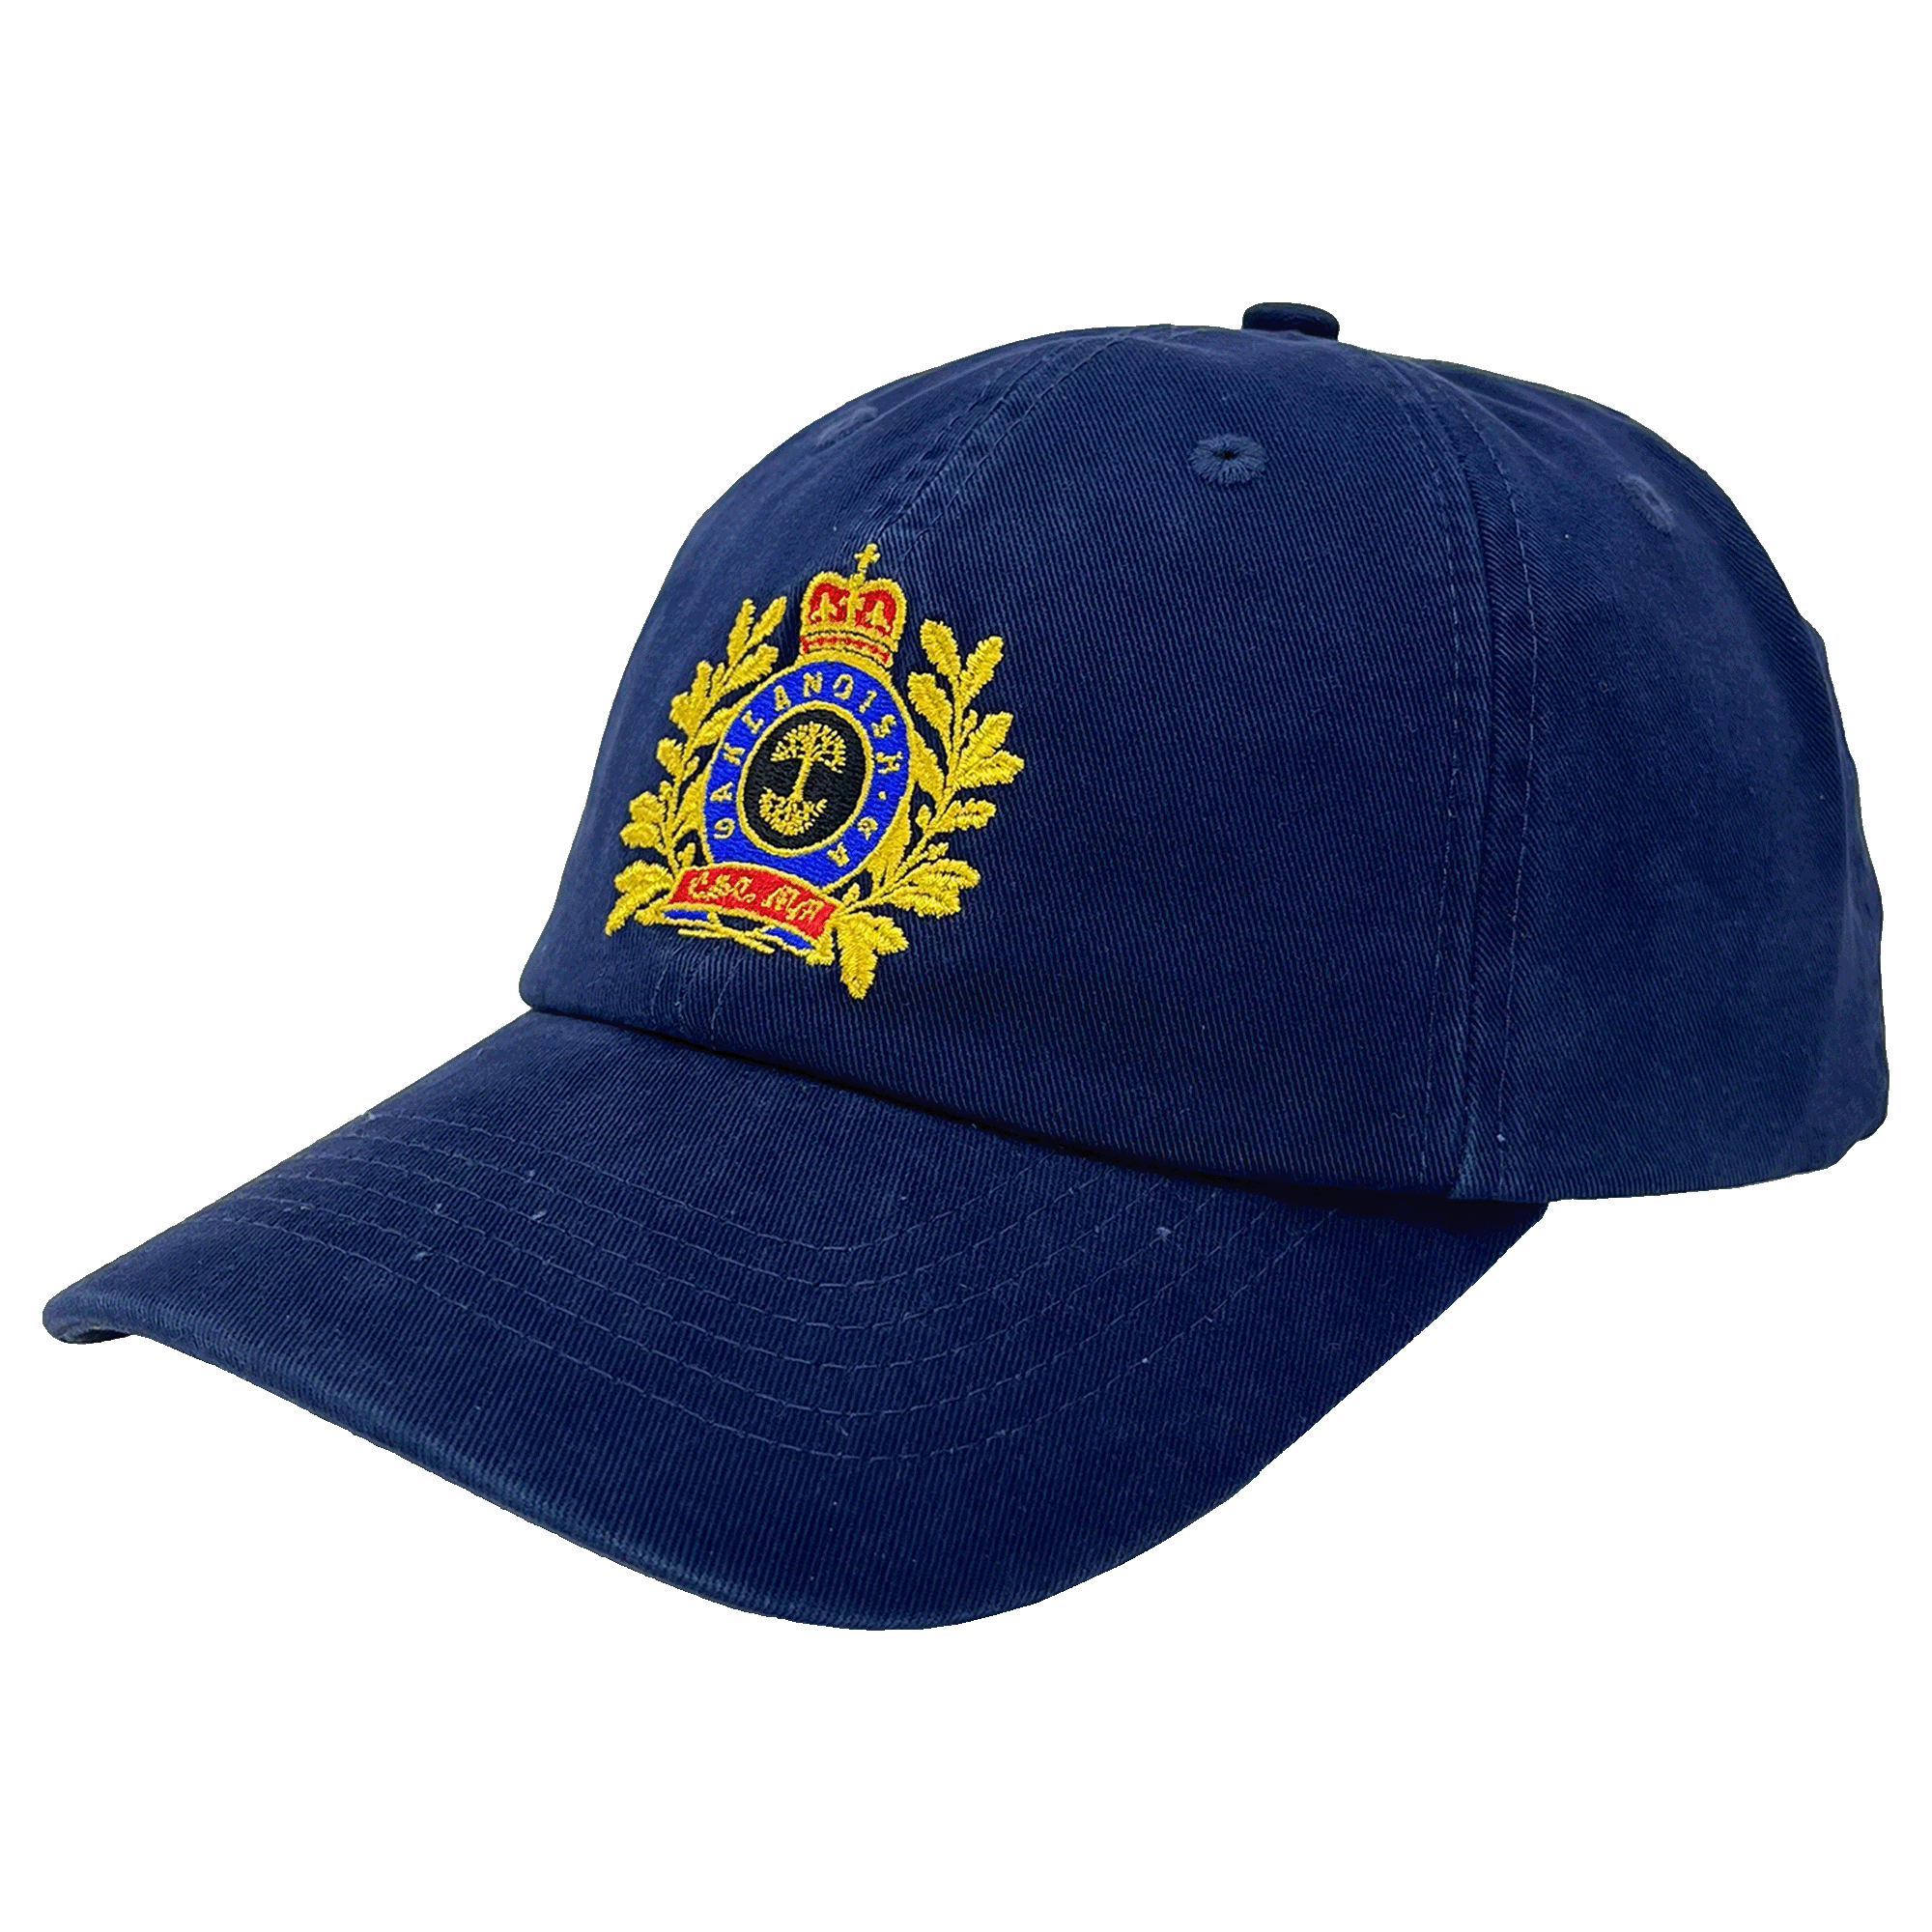 Side view of a navy blue dad cap with a prominent royalty-inspired embroidered Oaklandish patch on the crown.